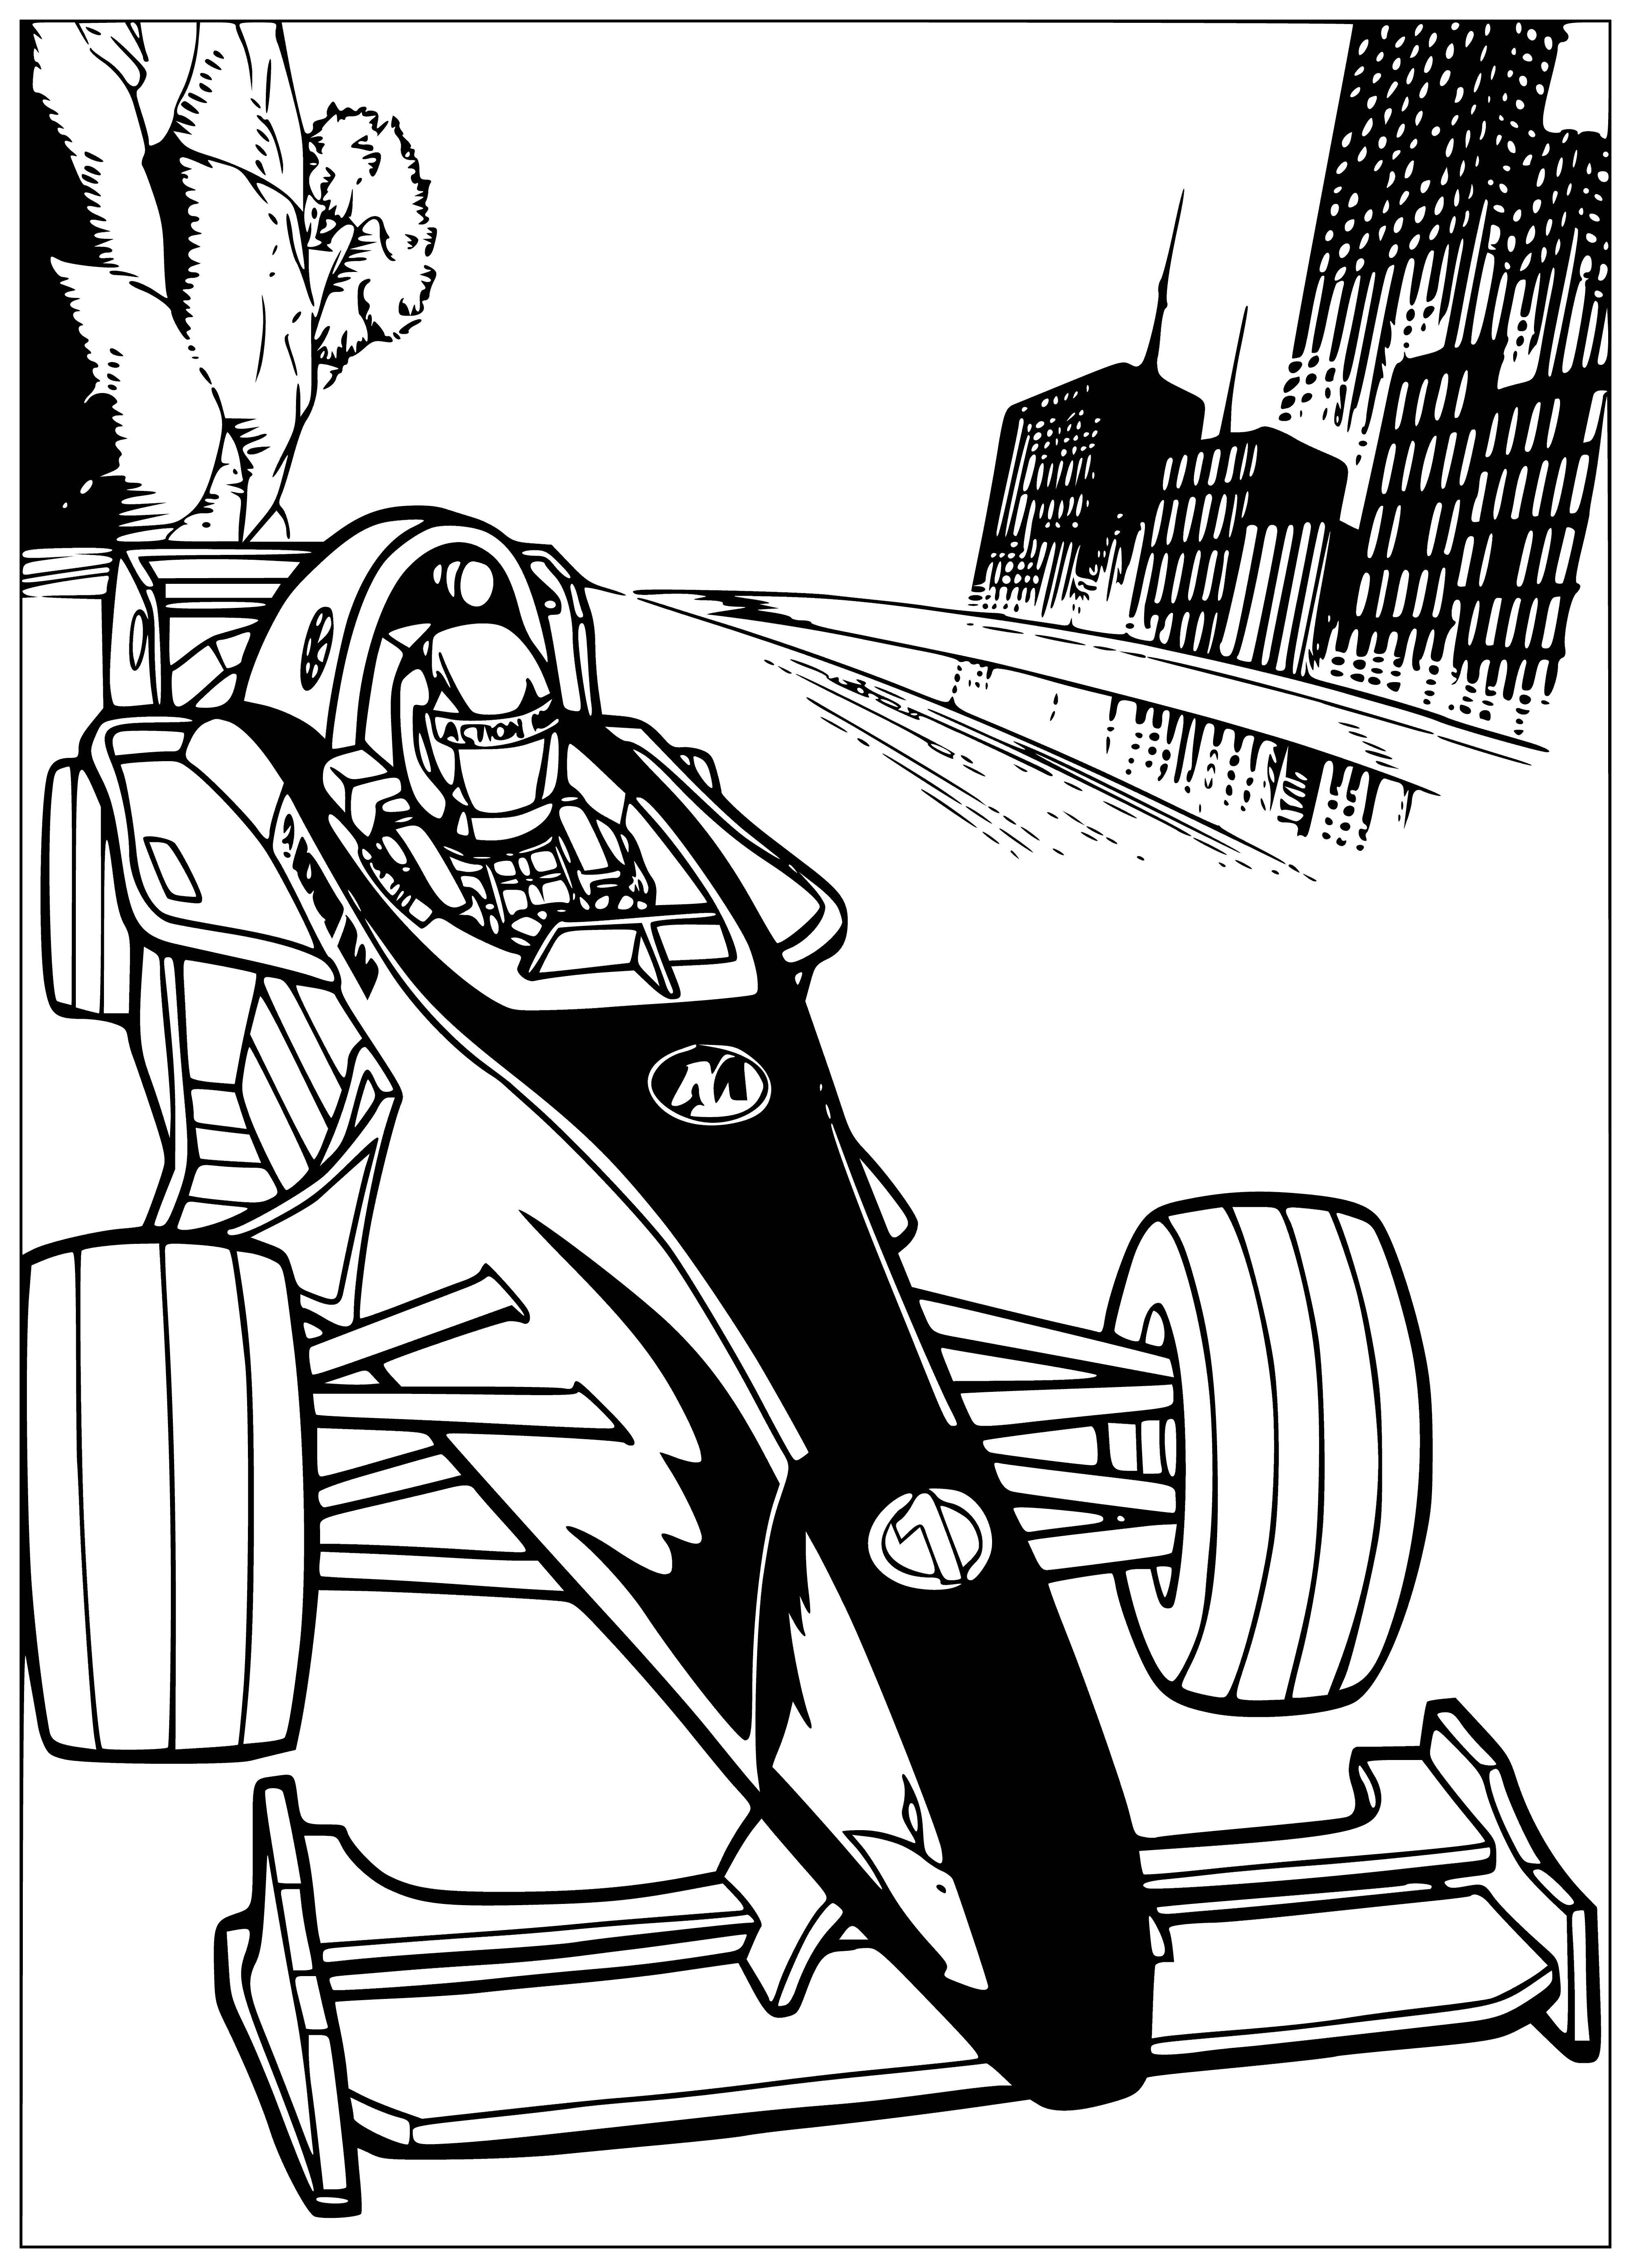 coloring page: Small, sleek, speedy racing car with pointed nose, smooth sides, large fins, bright red with white stripes, and a blue number 9. #actionman